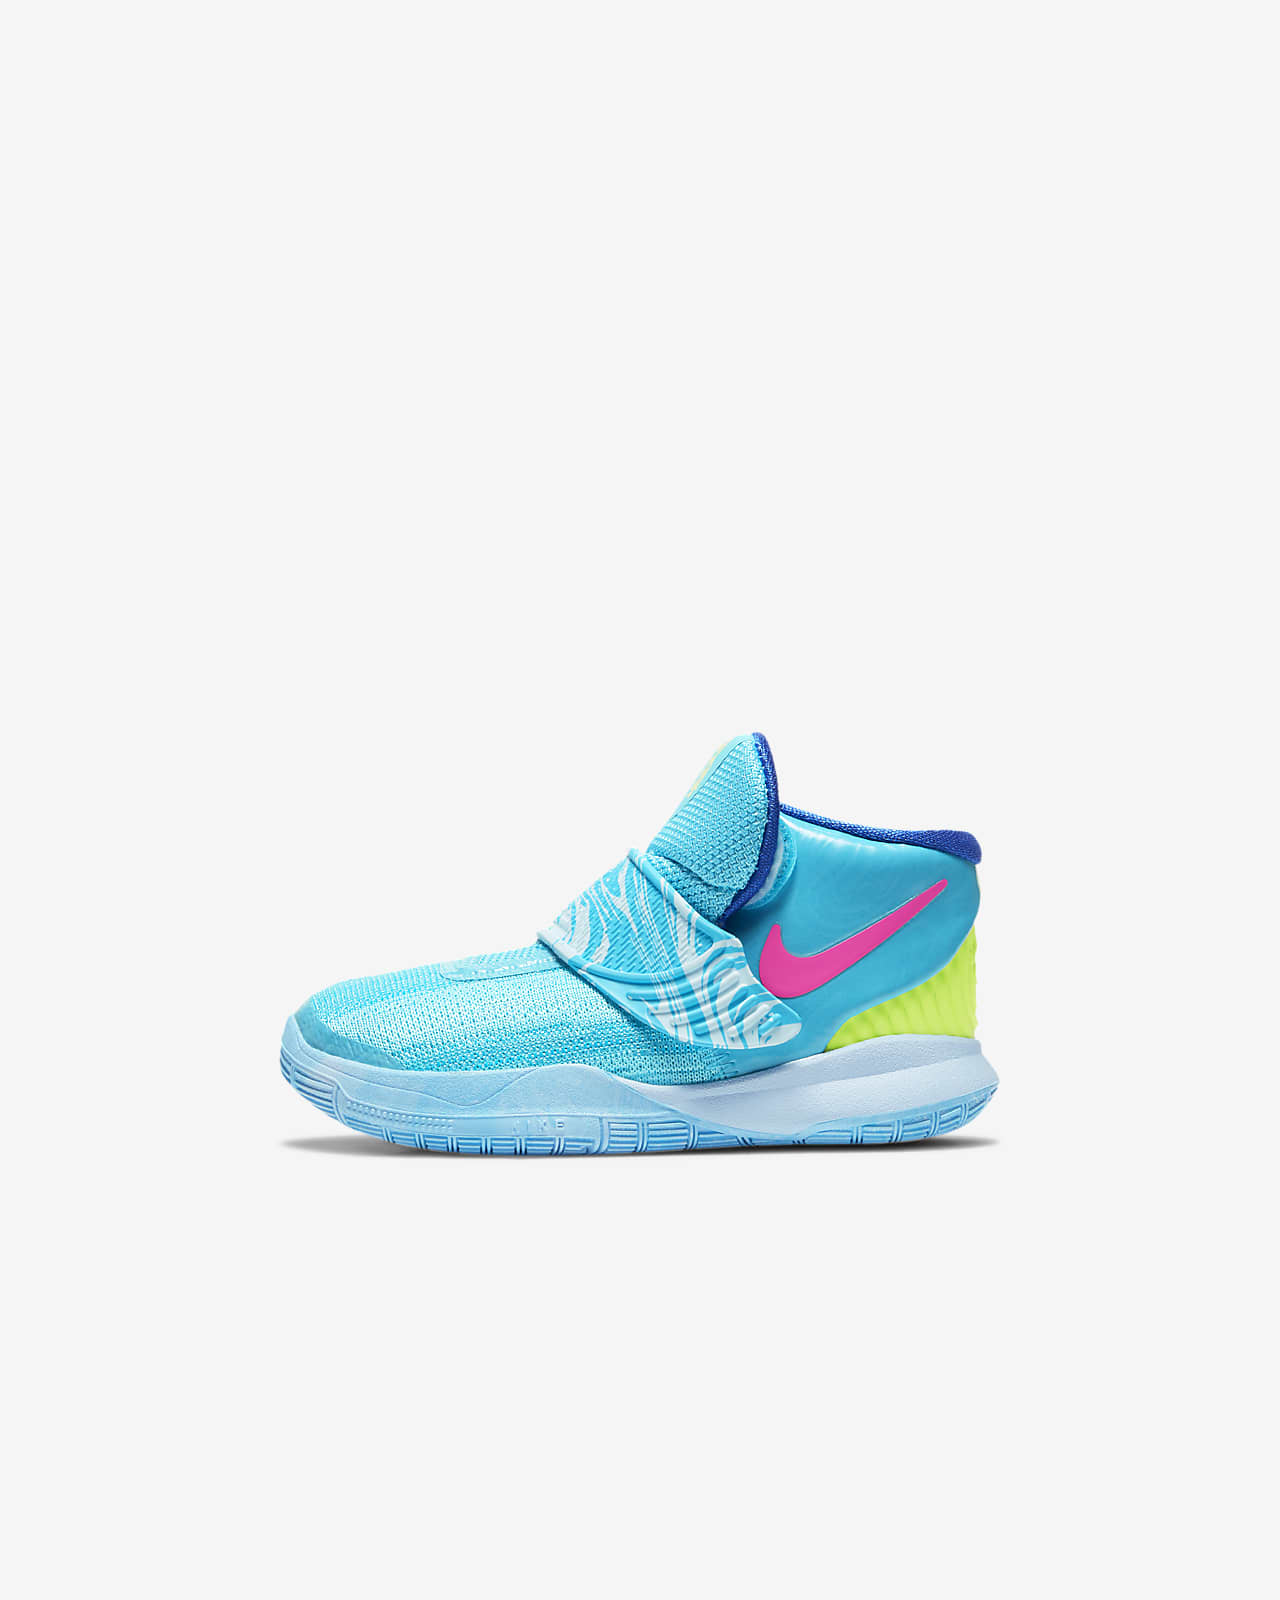 nike by you kyrie 6